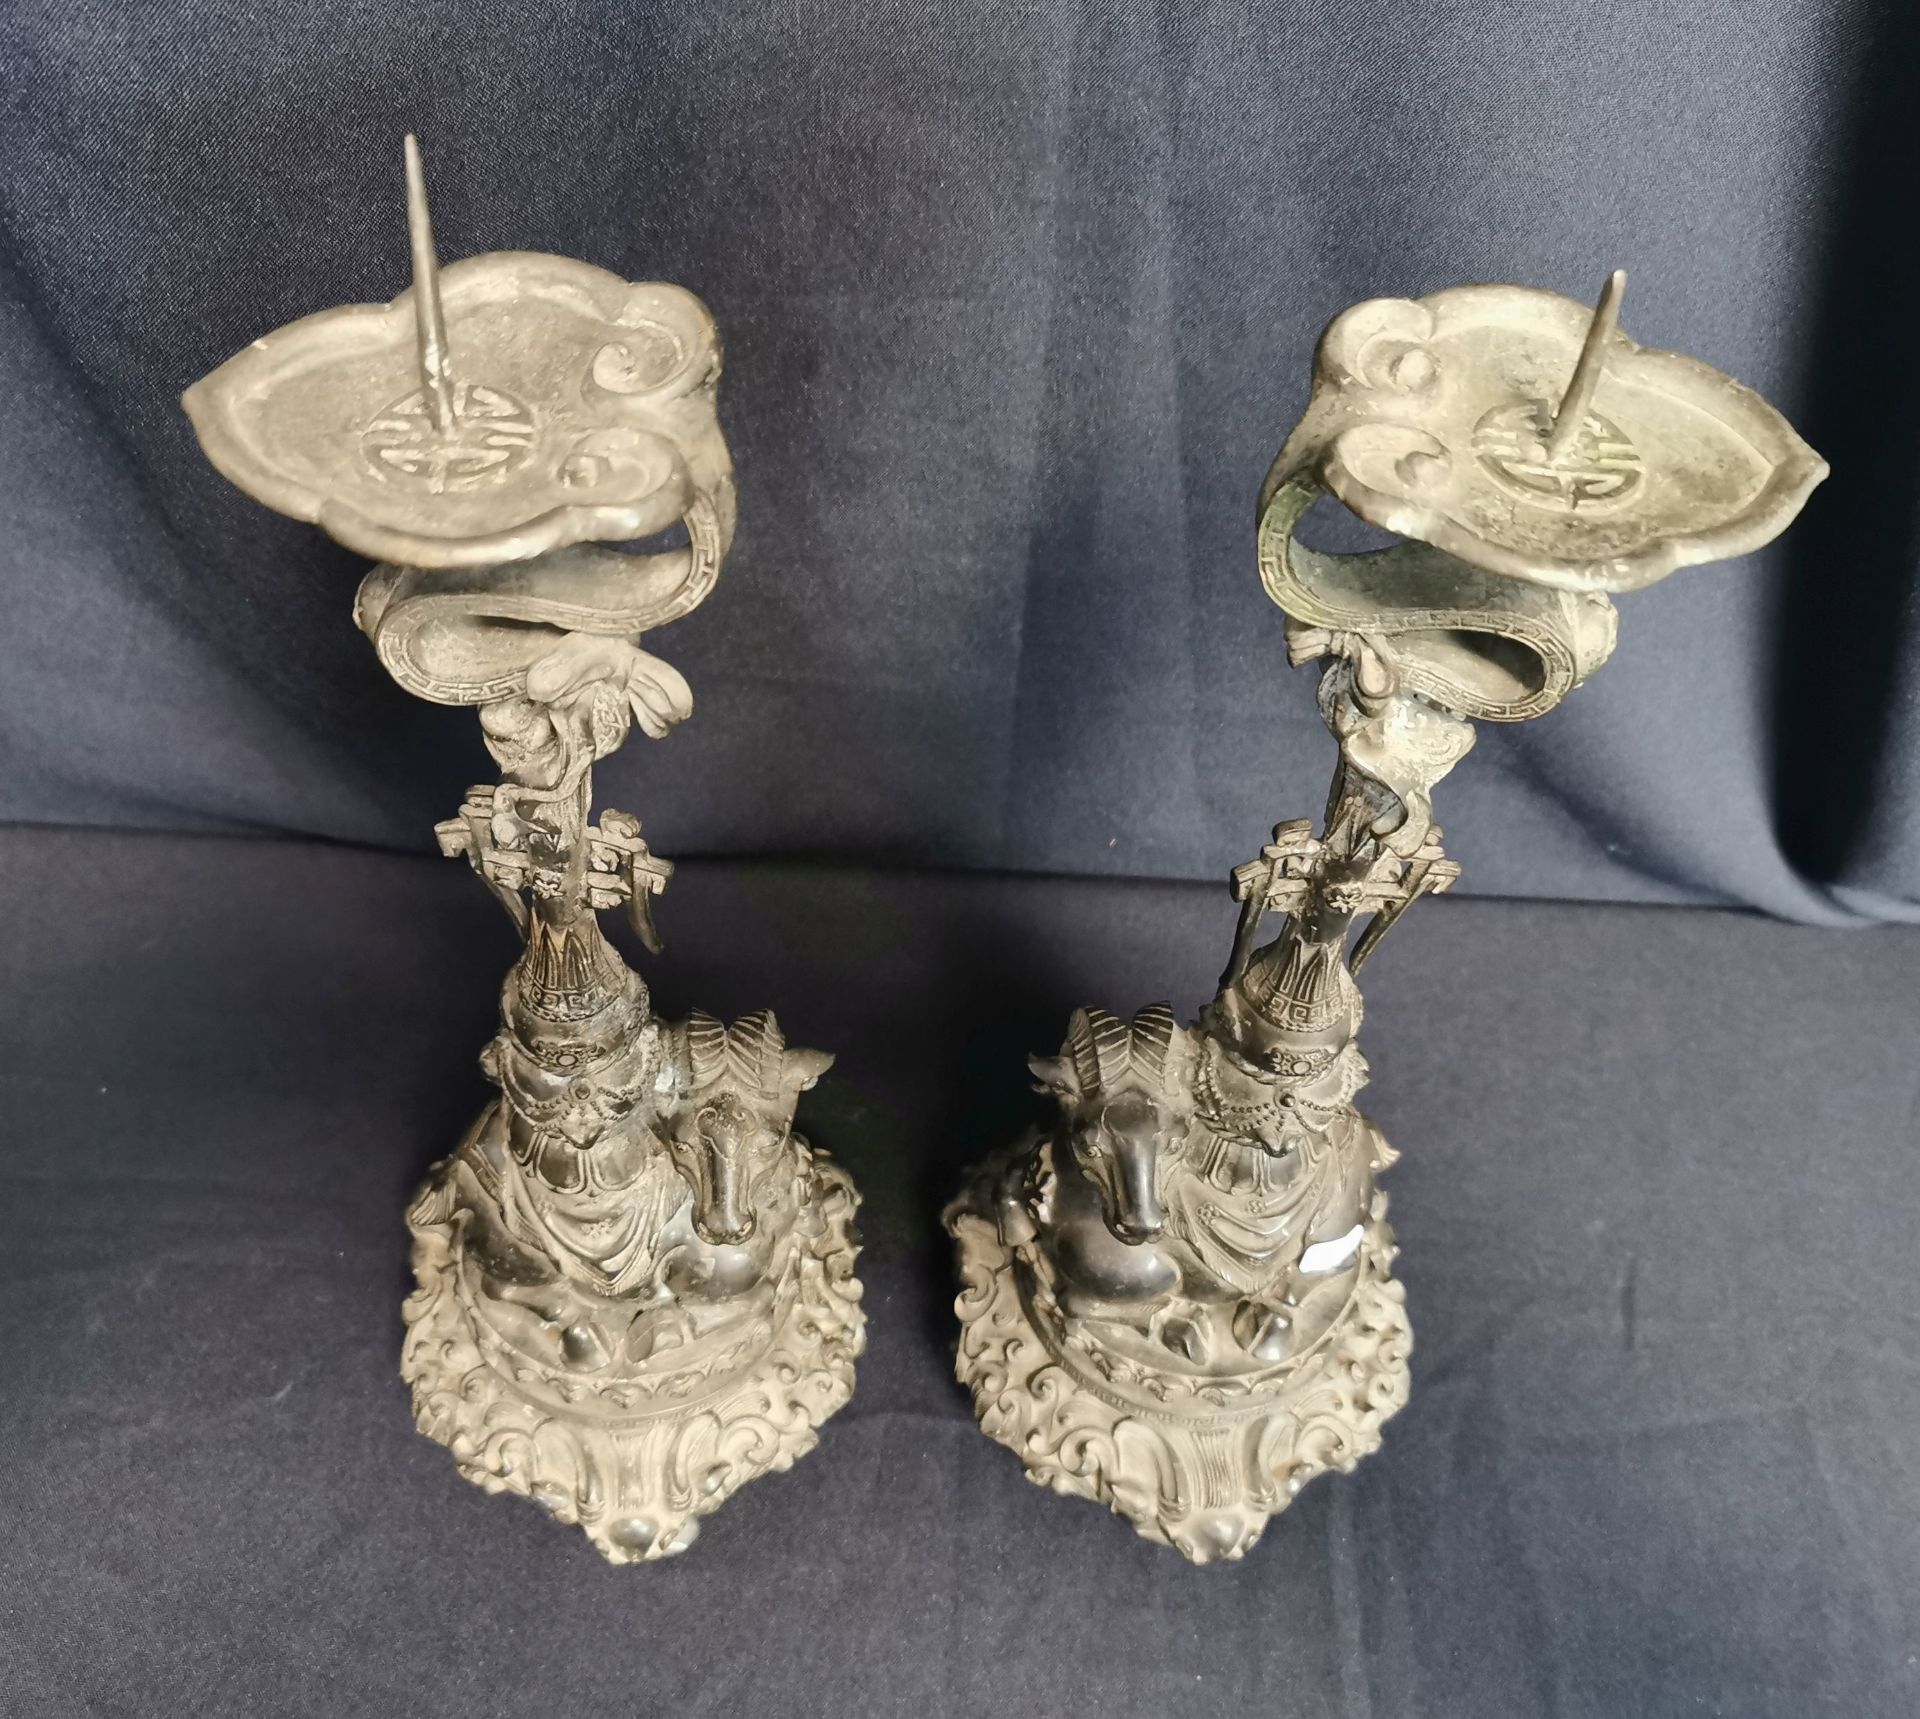 PAIR OF CANDLE STANDS WITH RAMS - Image 3 of 7